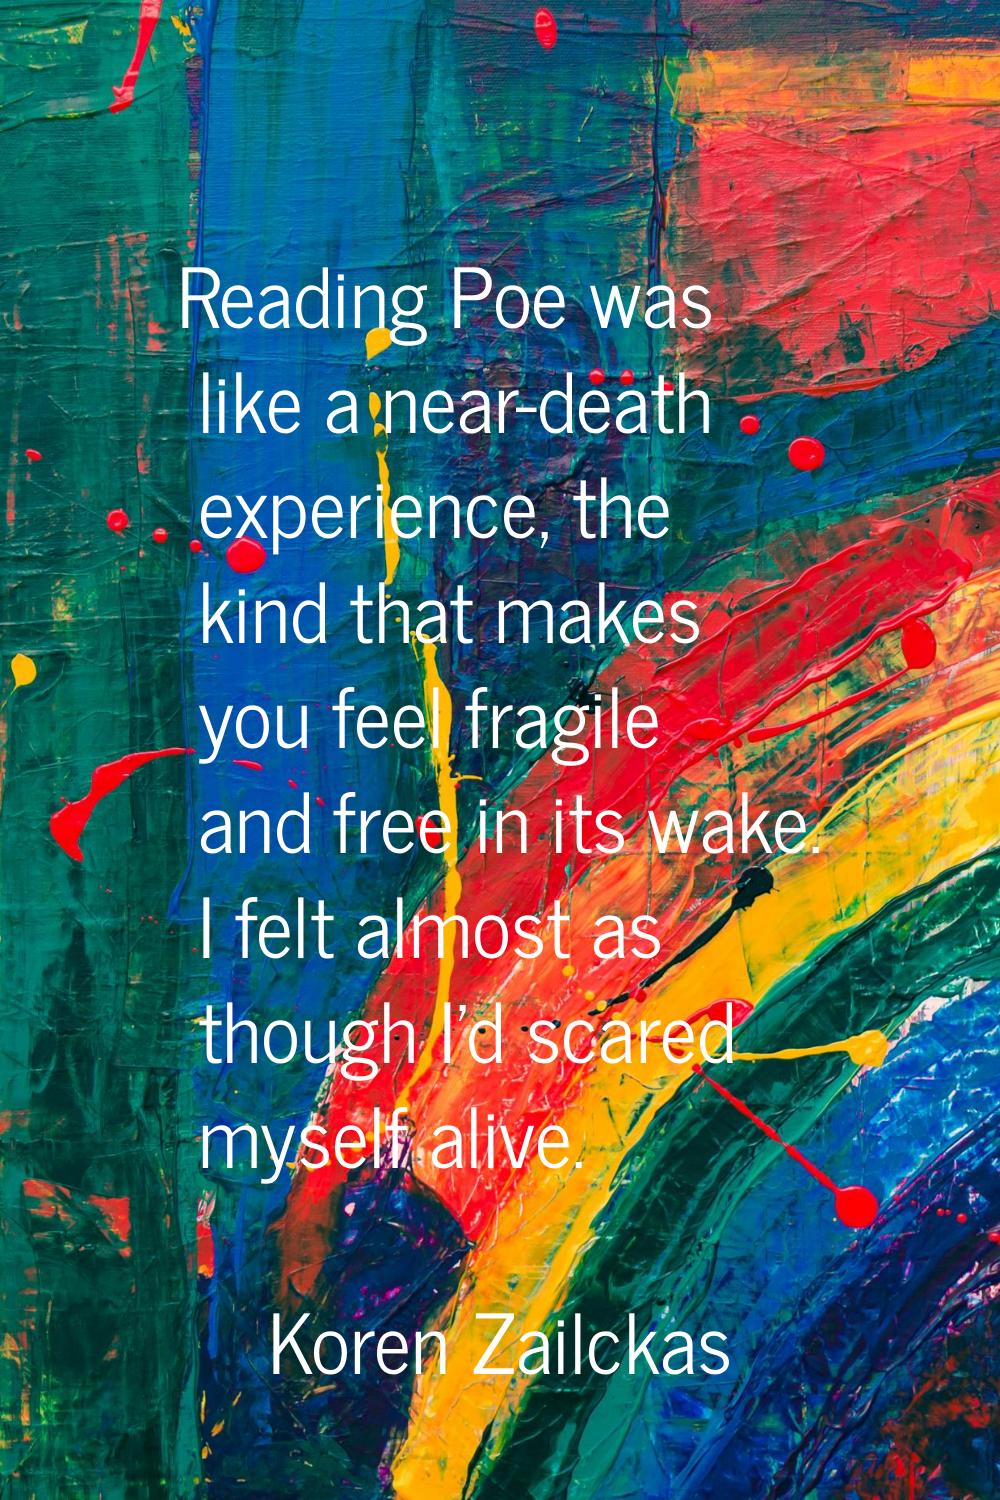 Reading Poe was like a near-death experience, the kind that makes you feel fragile and free in its 